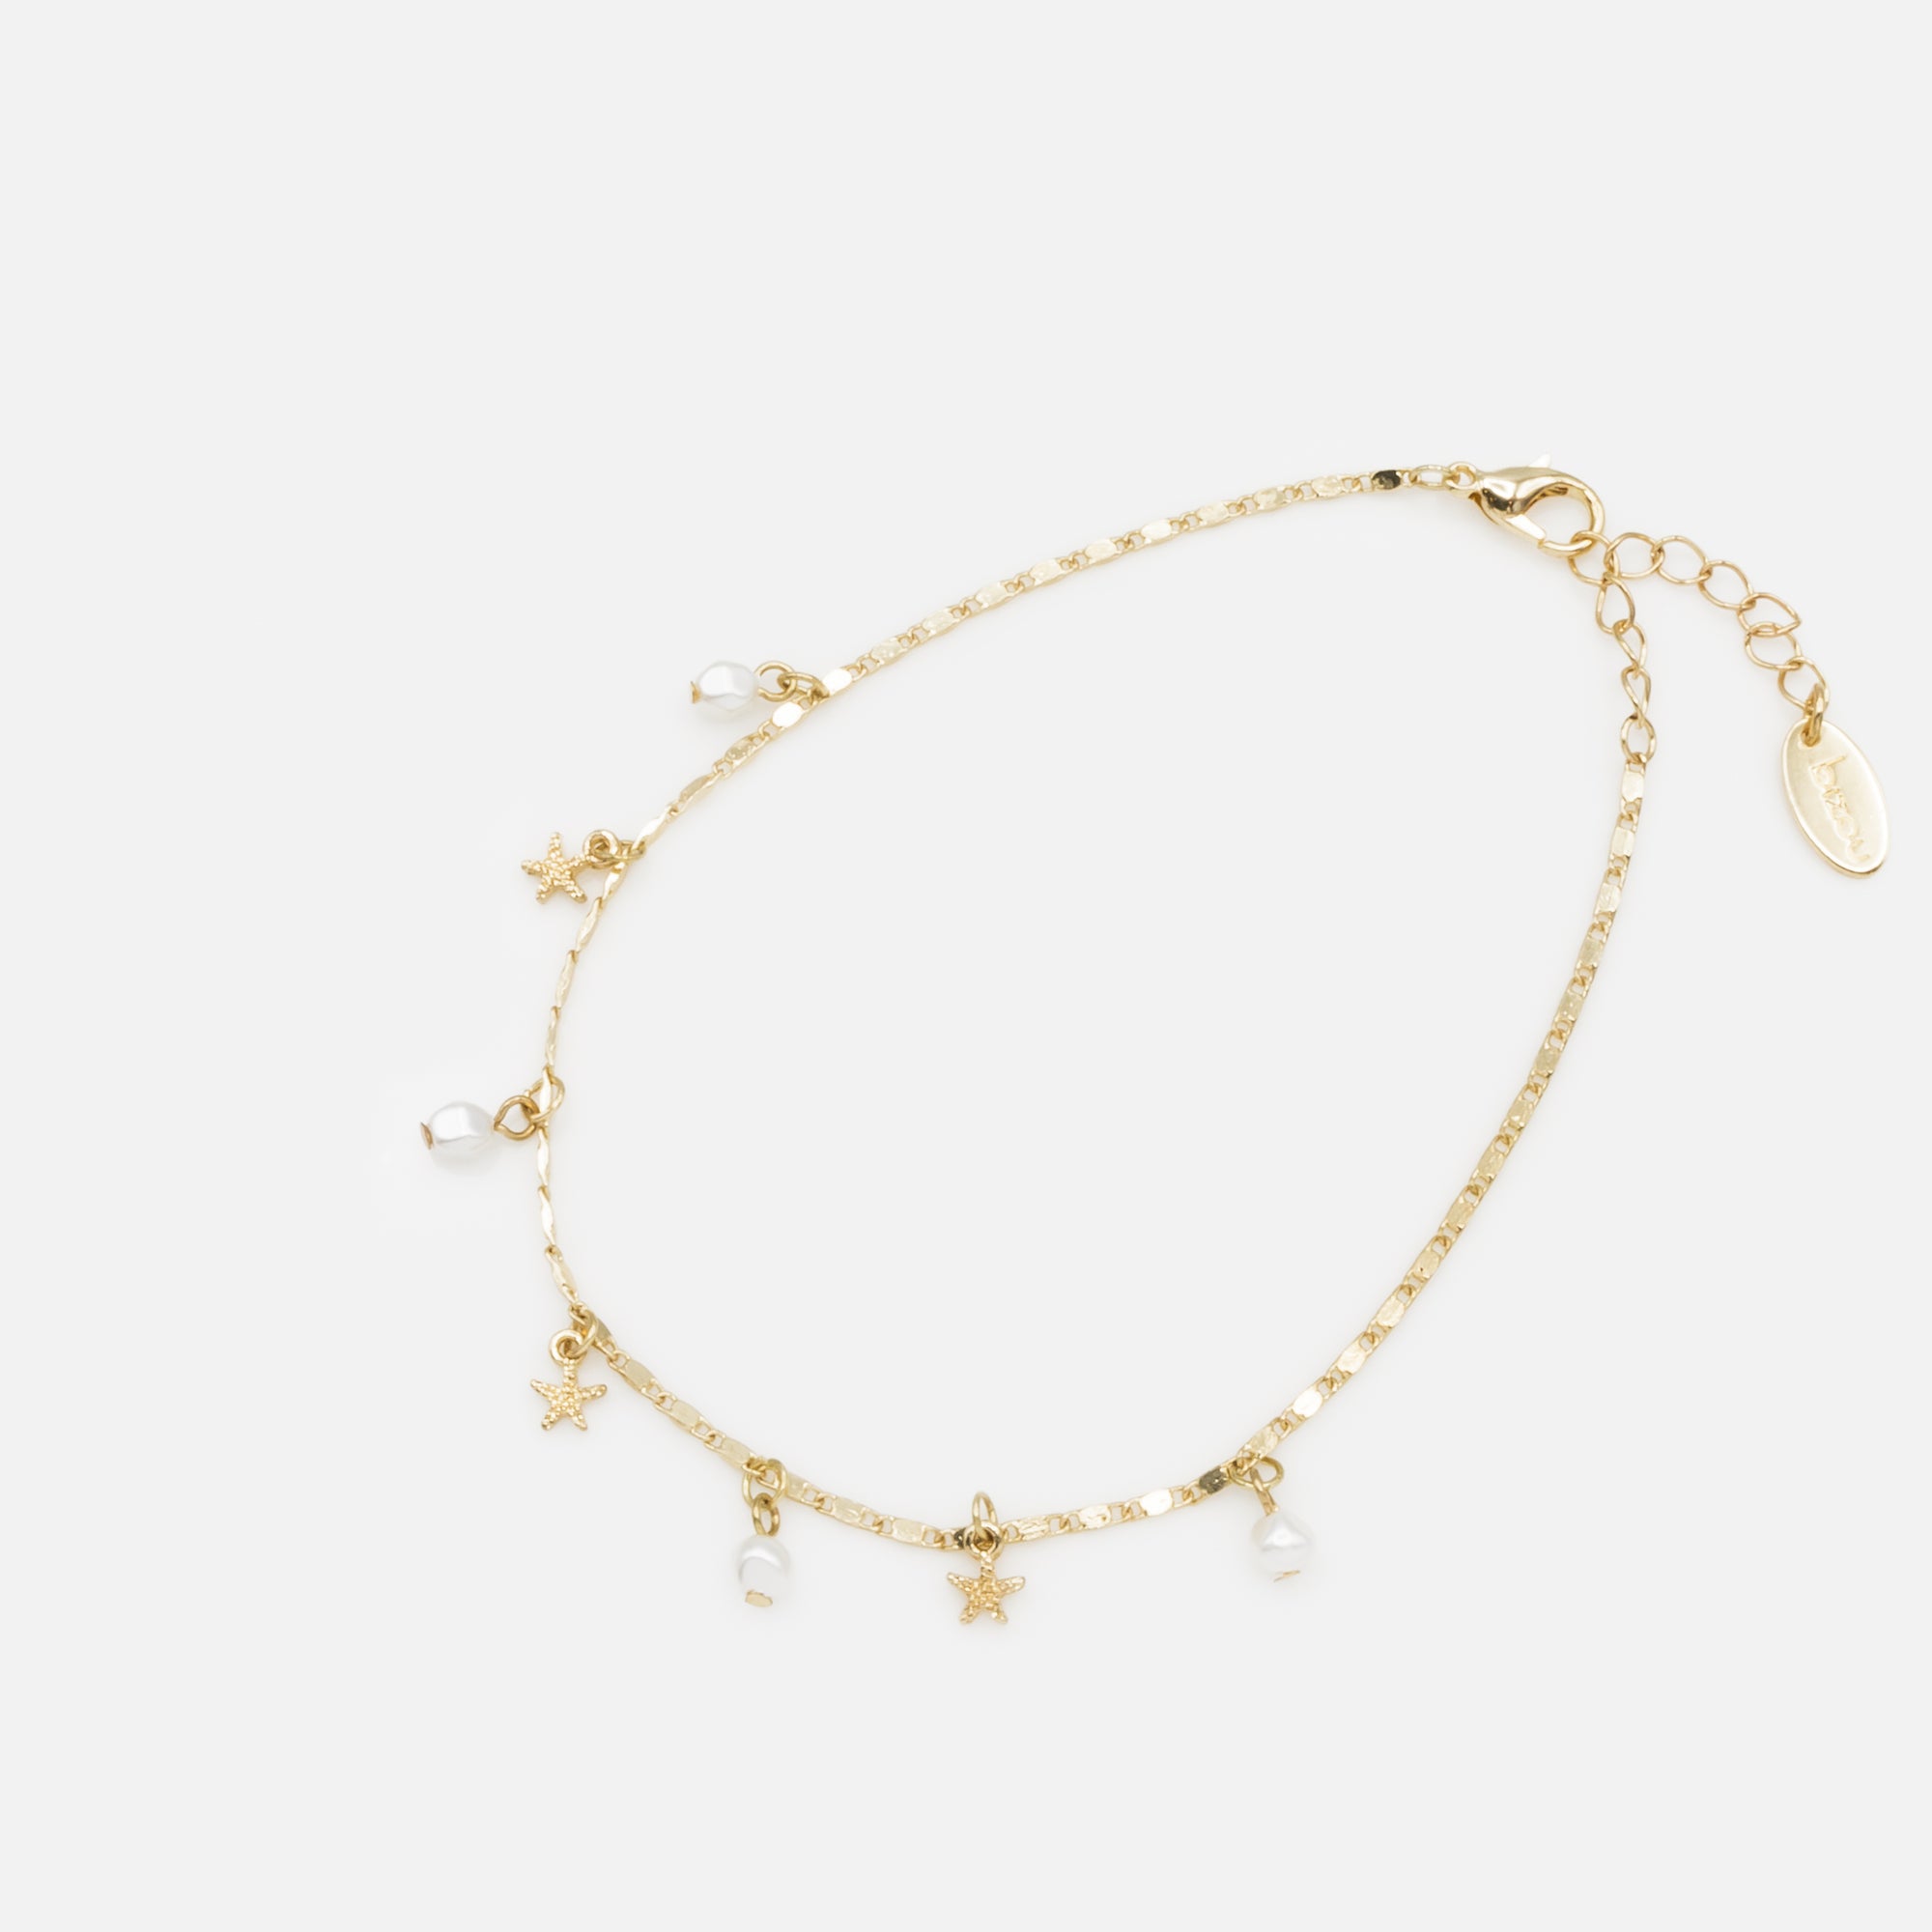 Gold anklet with pearls and starfish